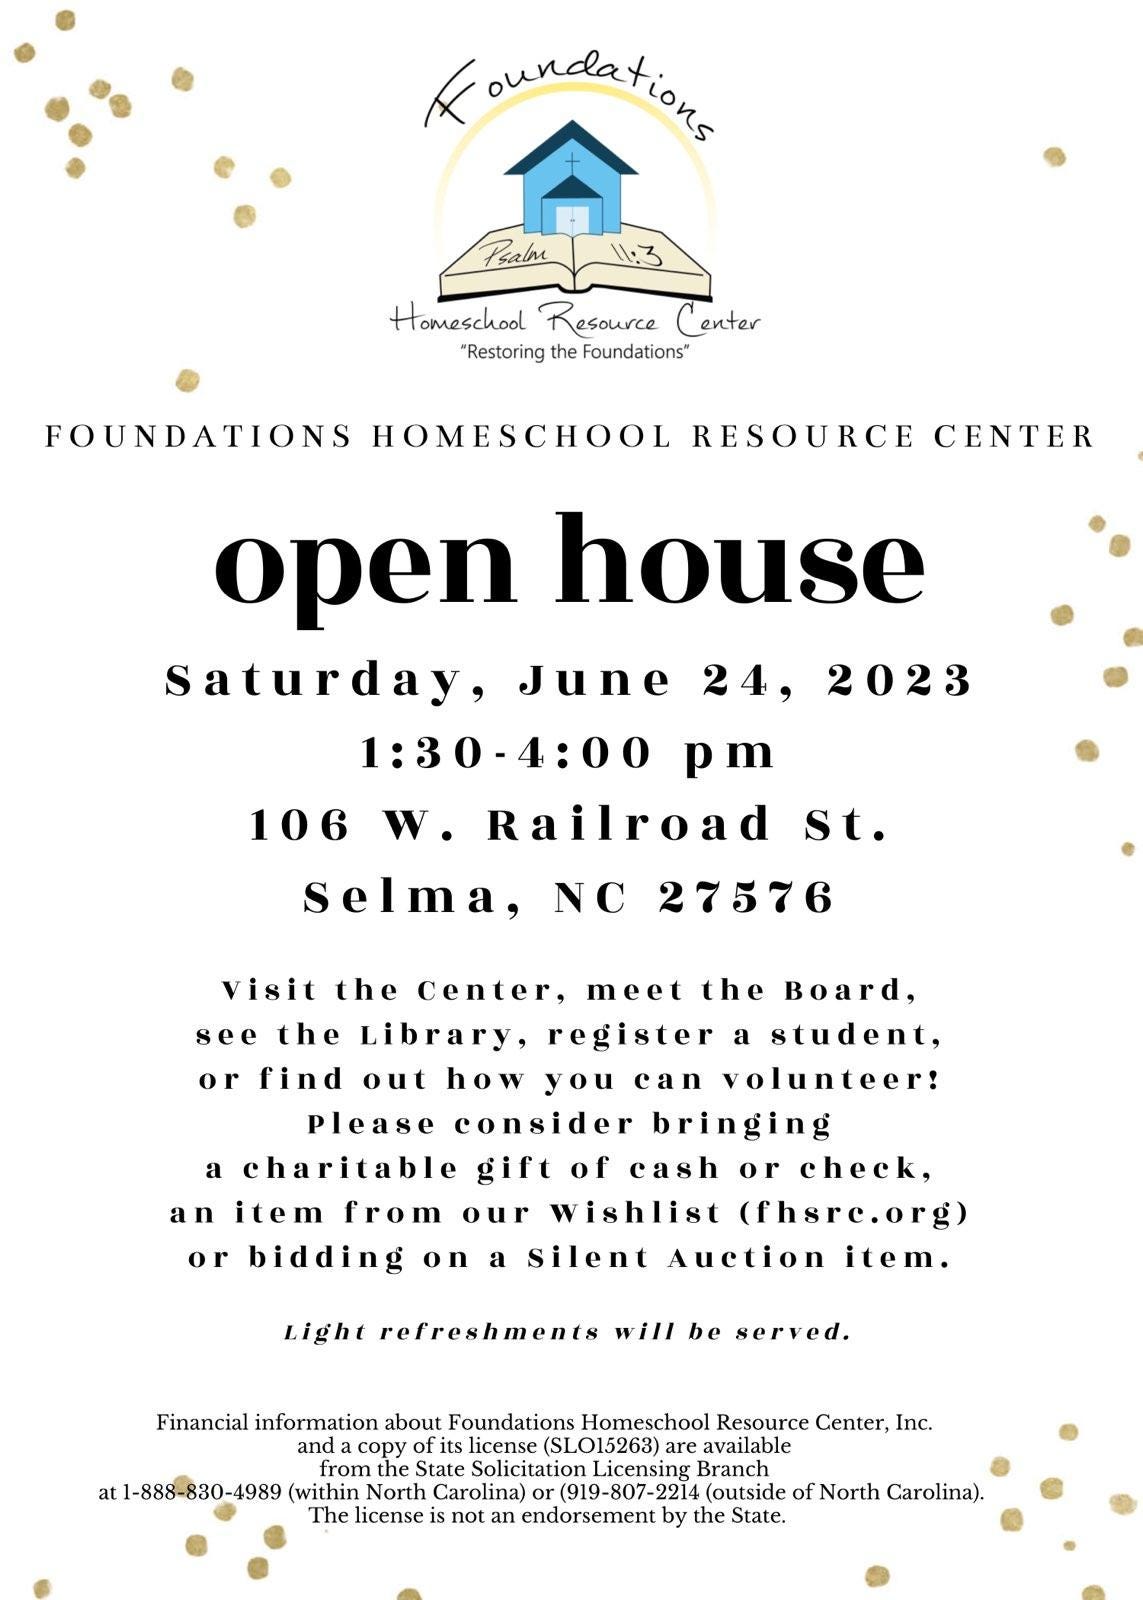 flyer for FHSRC grand opening/open house on June 24, 2023